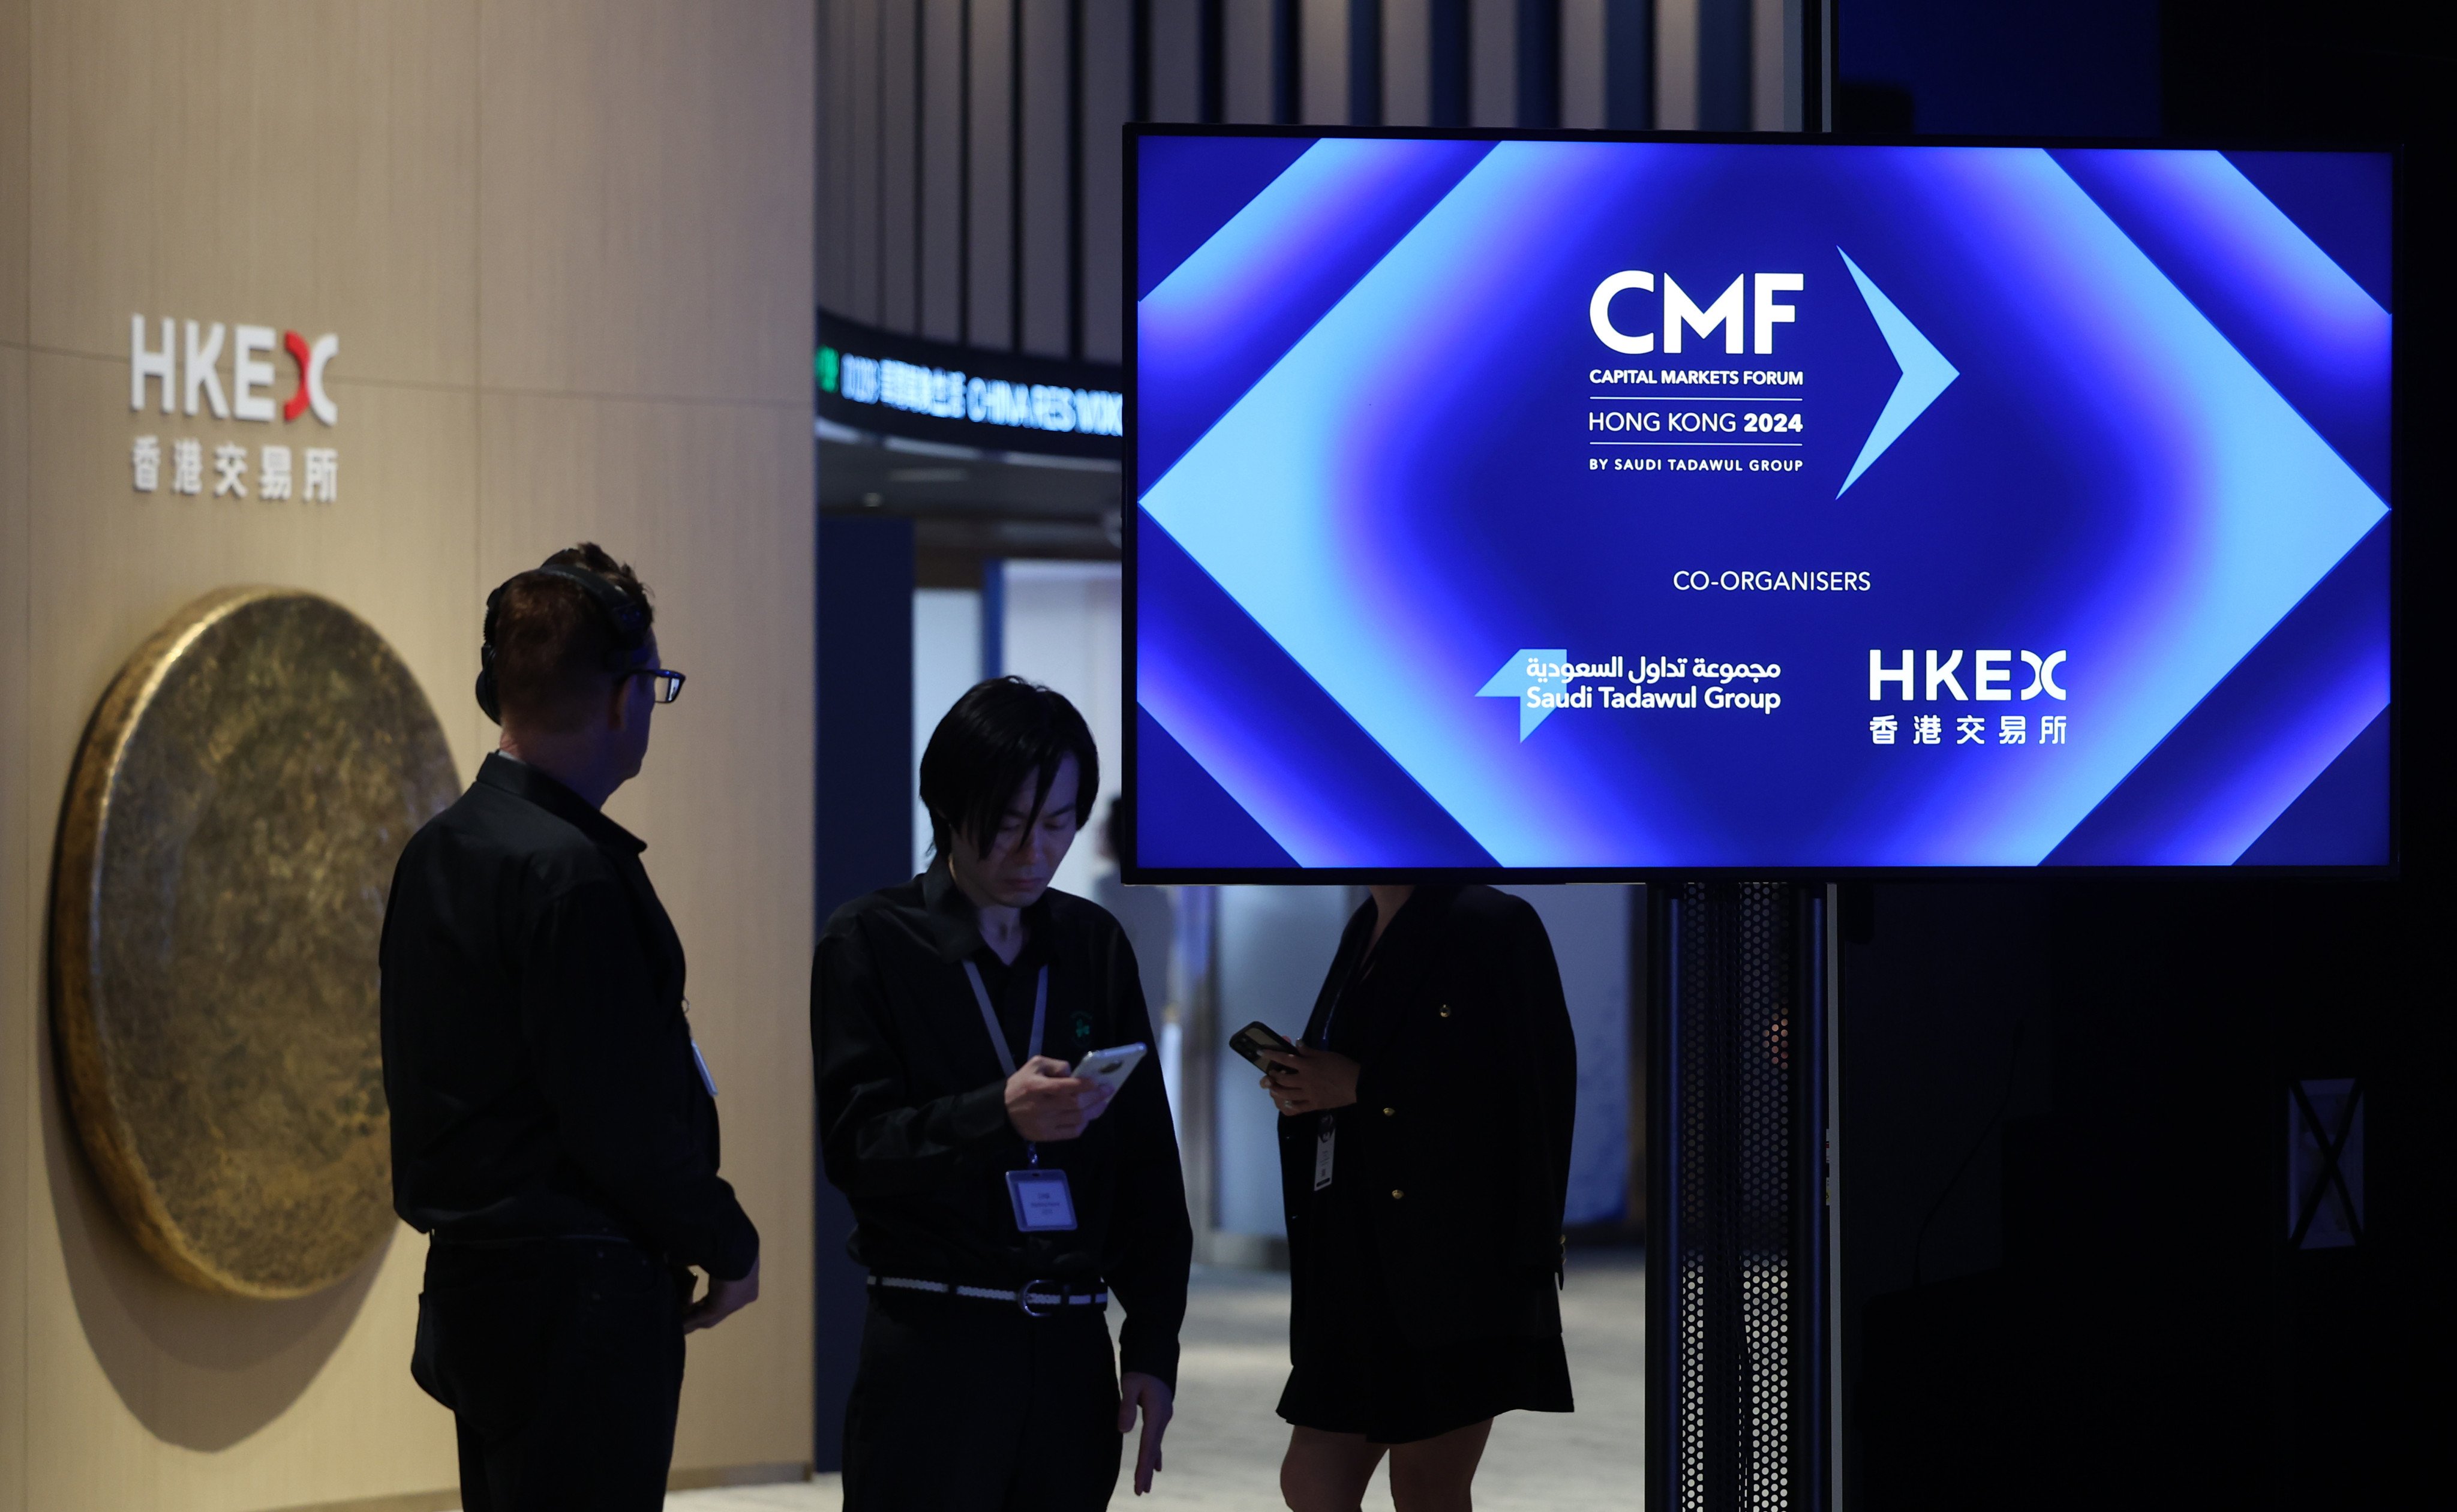 The inaugural international edition of the Saudi Tadawul Group’s Capital Markets Forum (CMF) at the Hong Kong stock exchange’s Connect Hall on 9 May 2024. Photo: Edmond So